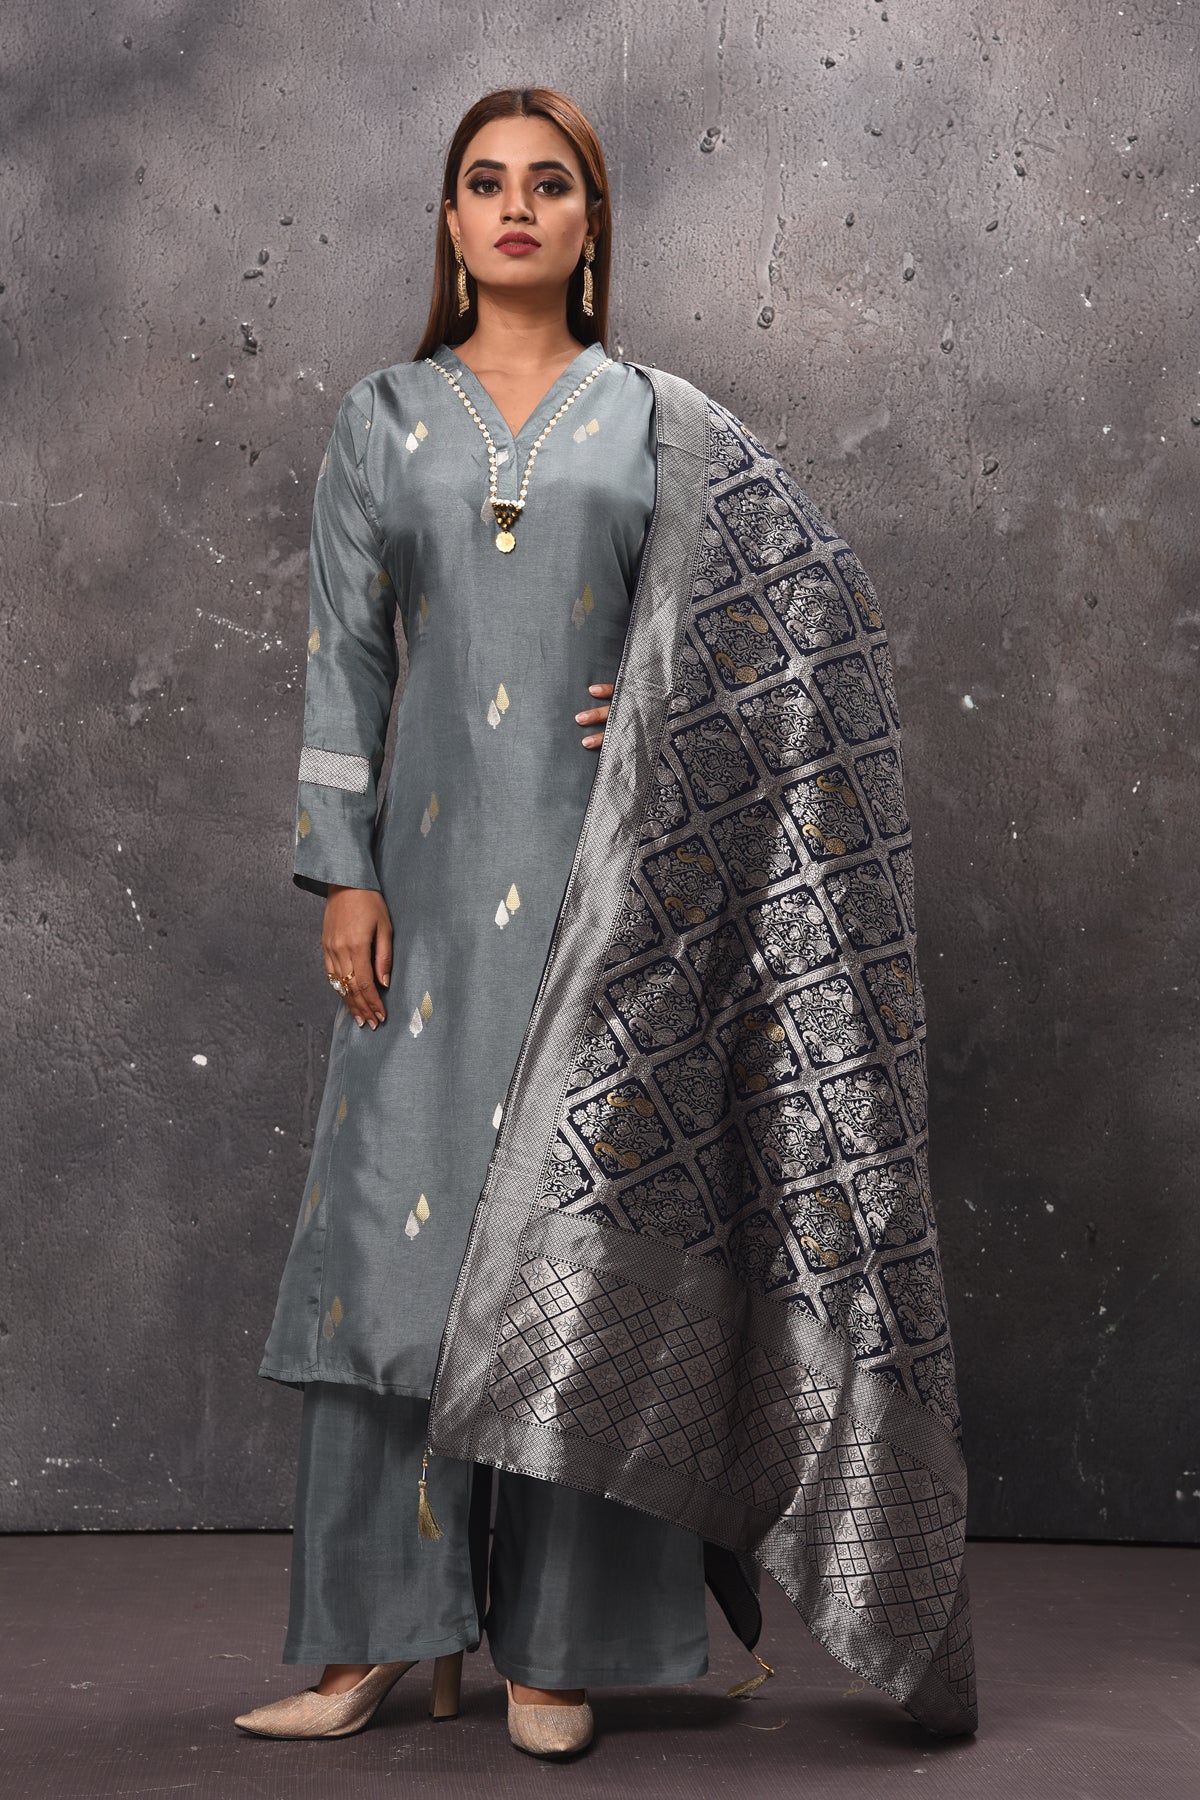 Discover more than 160 dupatta with grey suit super hot